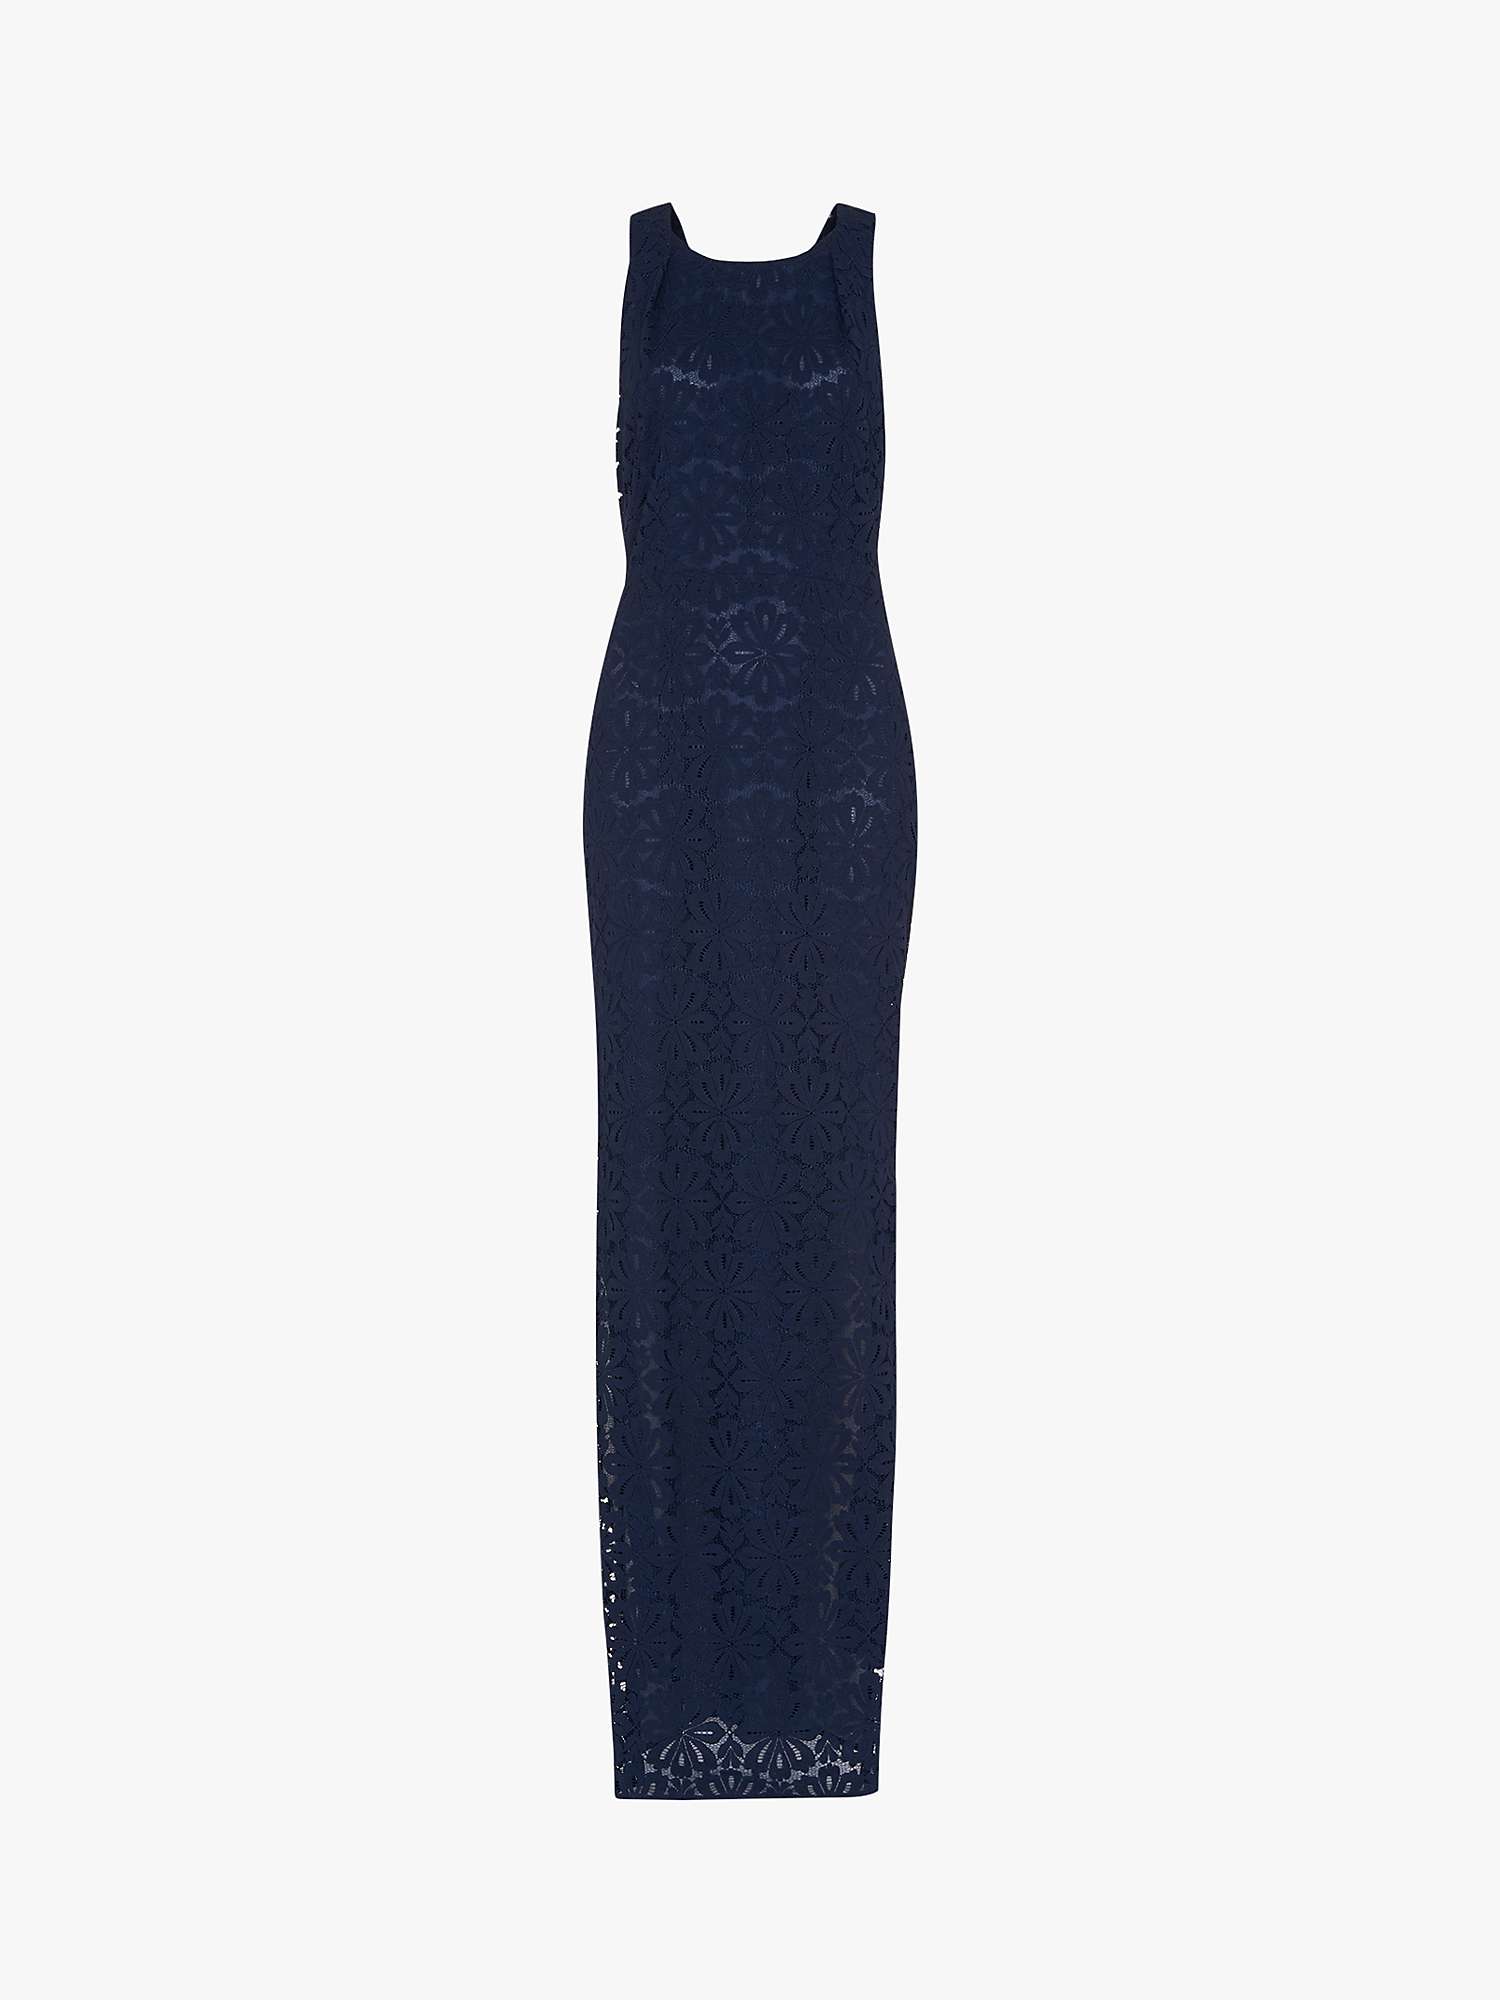 Whistles Lace Tie Back Maxi Dress, Navy at John Lewis & Partners